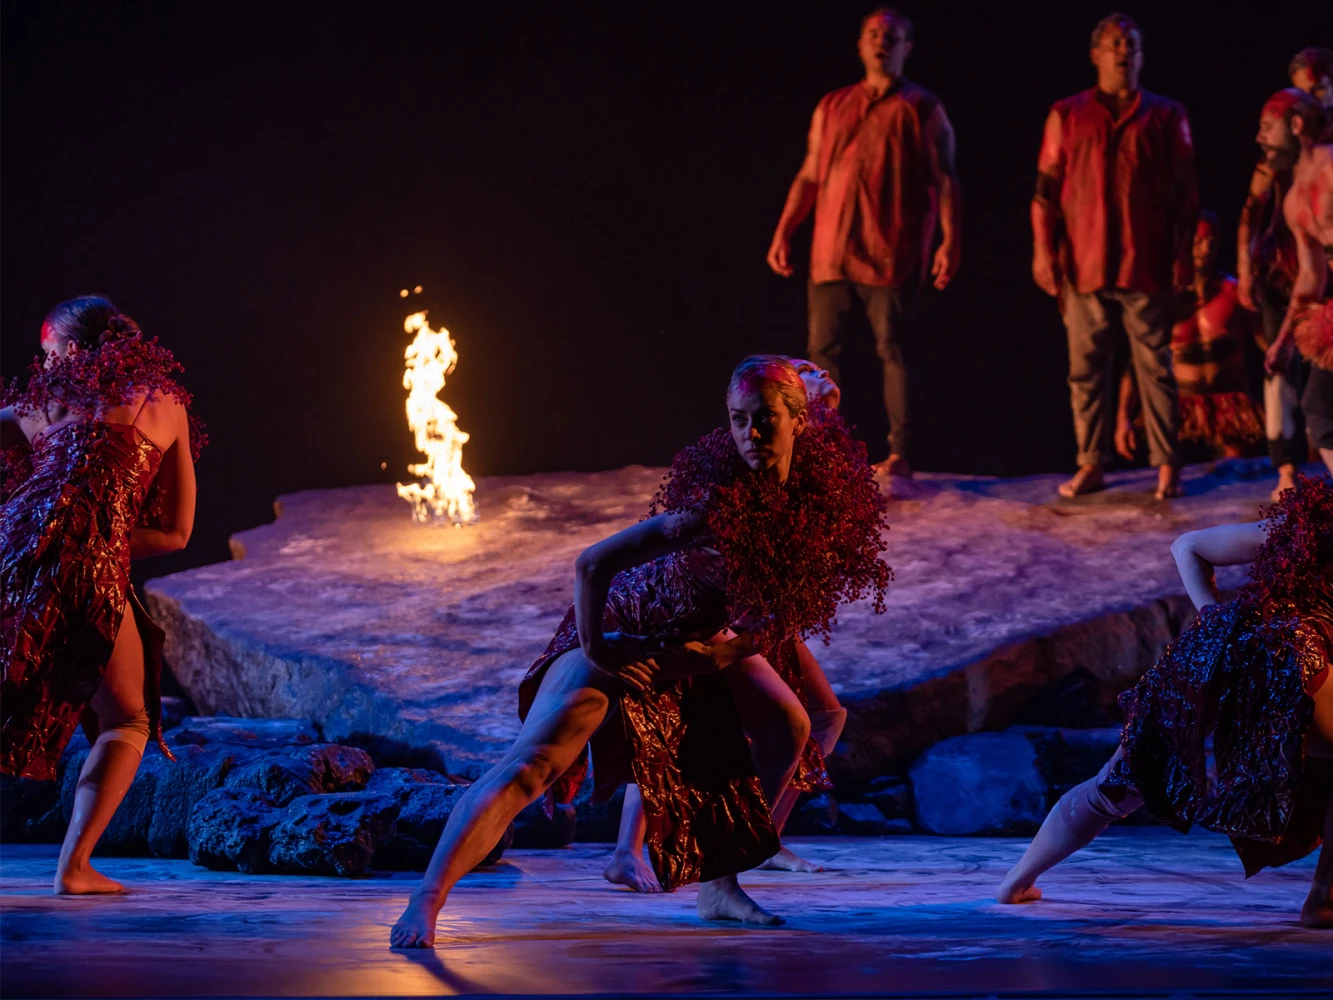 Wudjang: Not the Past presented by Bangarra Dance Theatre: What to expect - 2